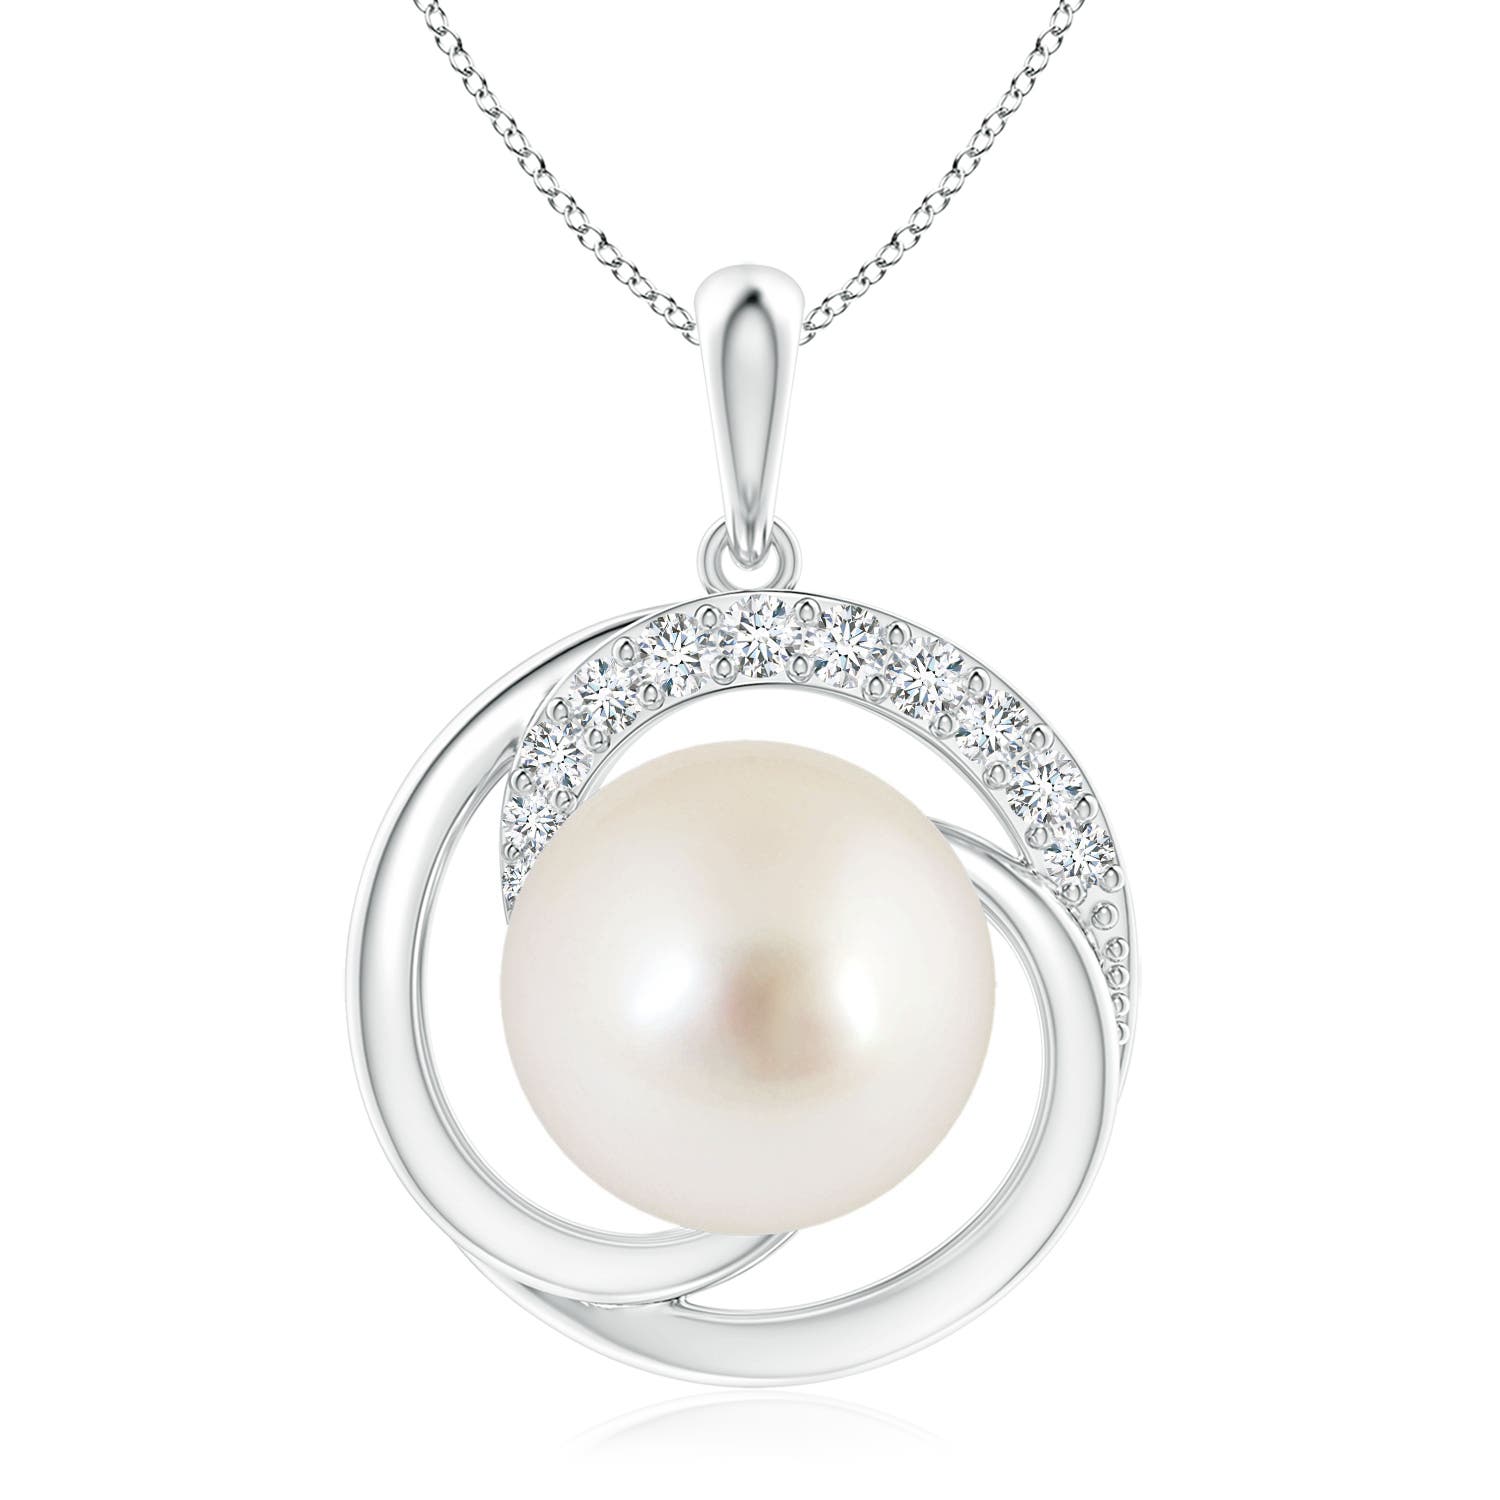 AAAA - South Sea Cultured Pearl / 9.76 CT / 14 KT White Gold